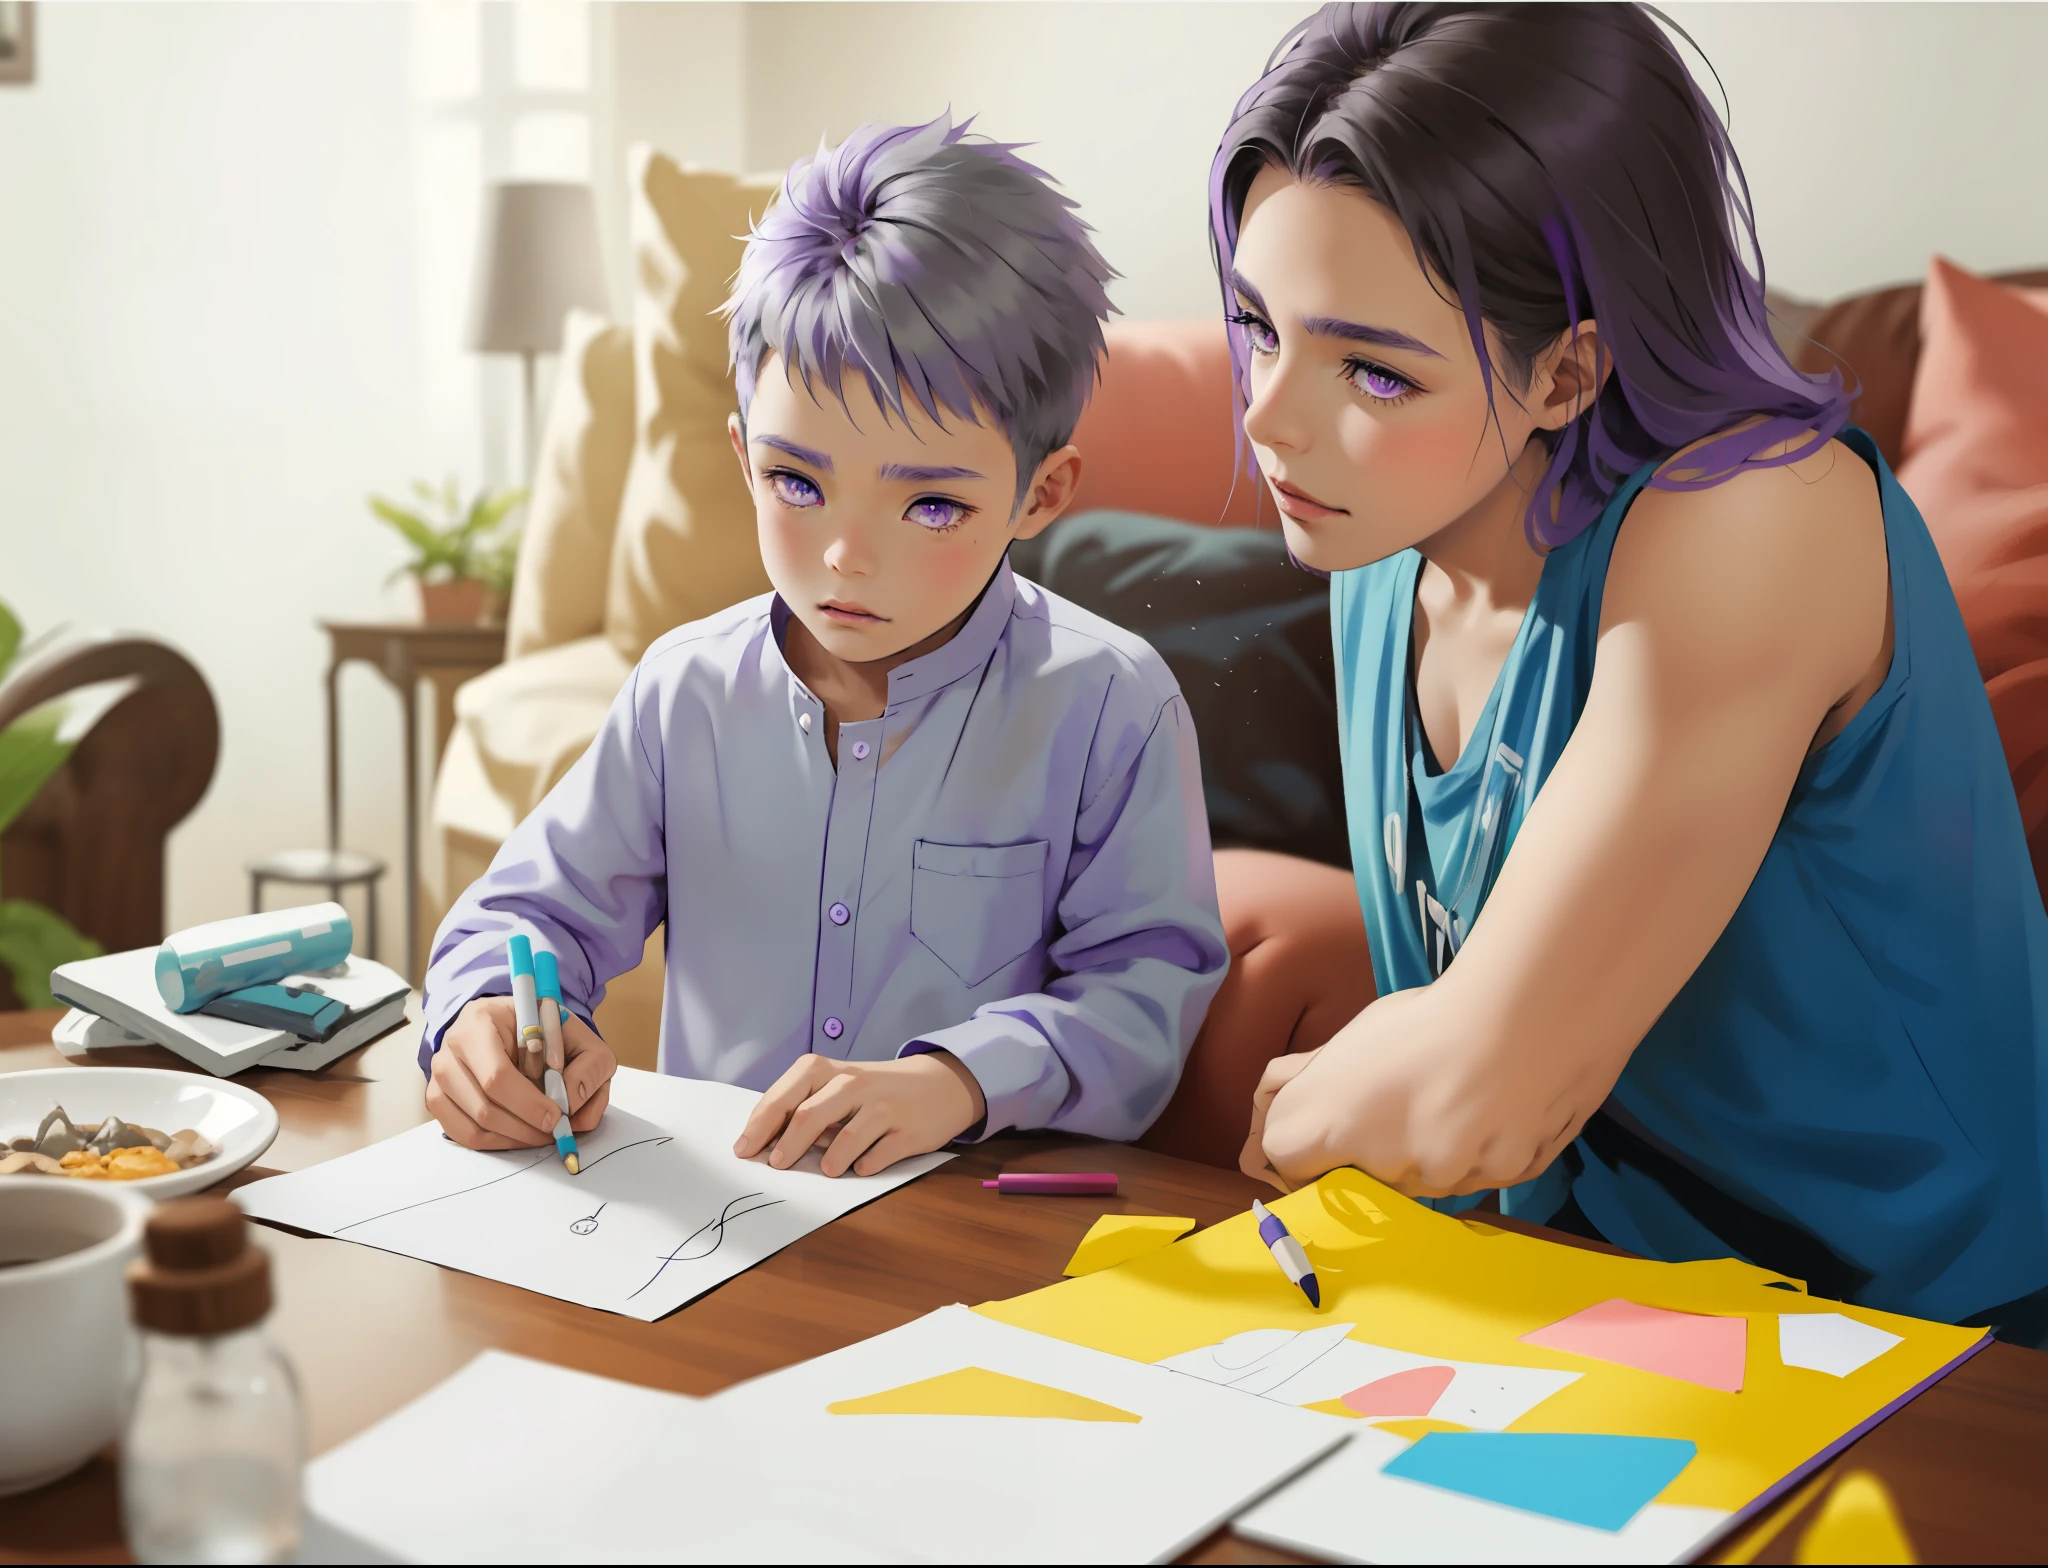 There is an 8 year old boy with purple hair, purple eyes, and his mother with gray hair and gray eyes, they are drawing and talking.